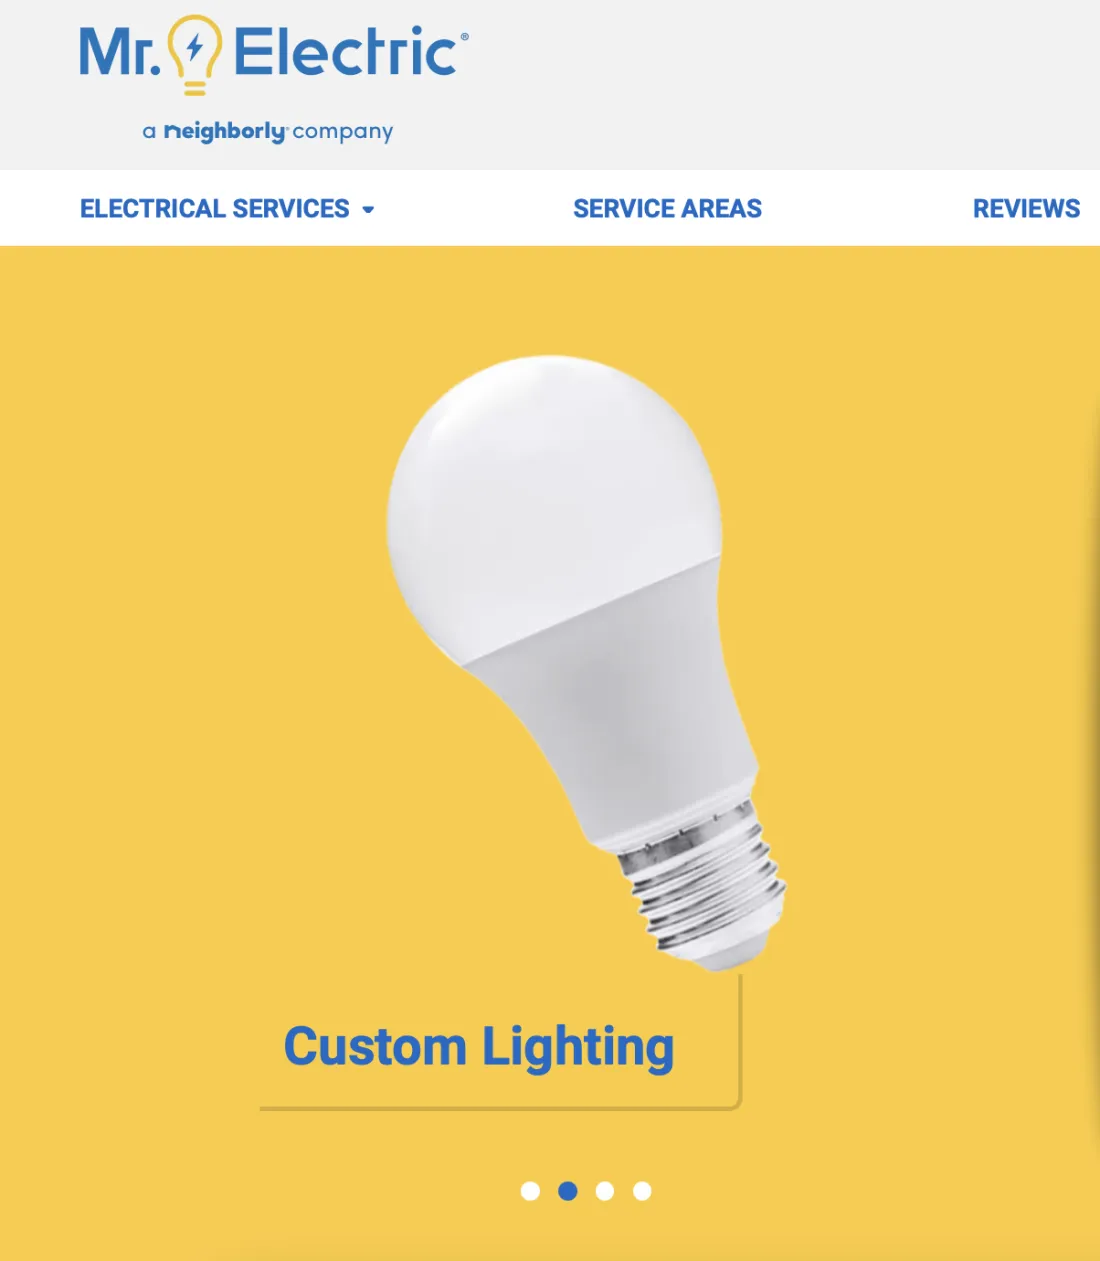 Image of website for Mr. Electric